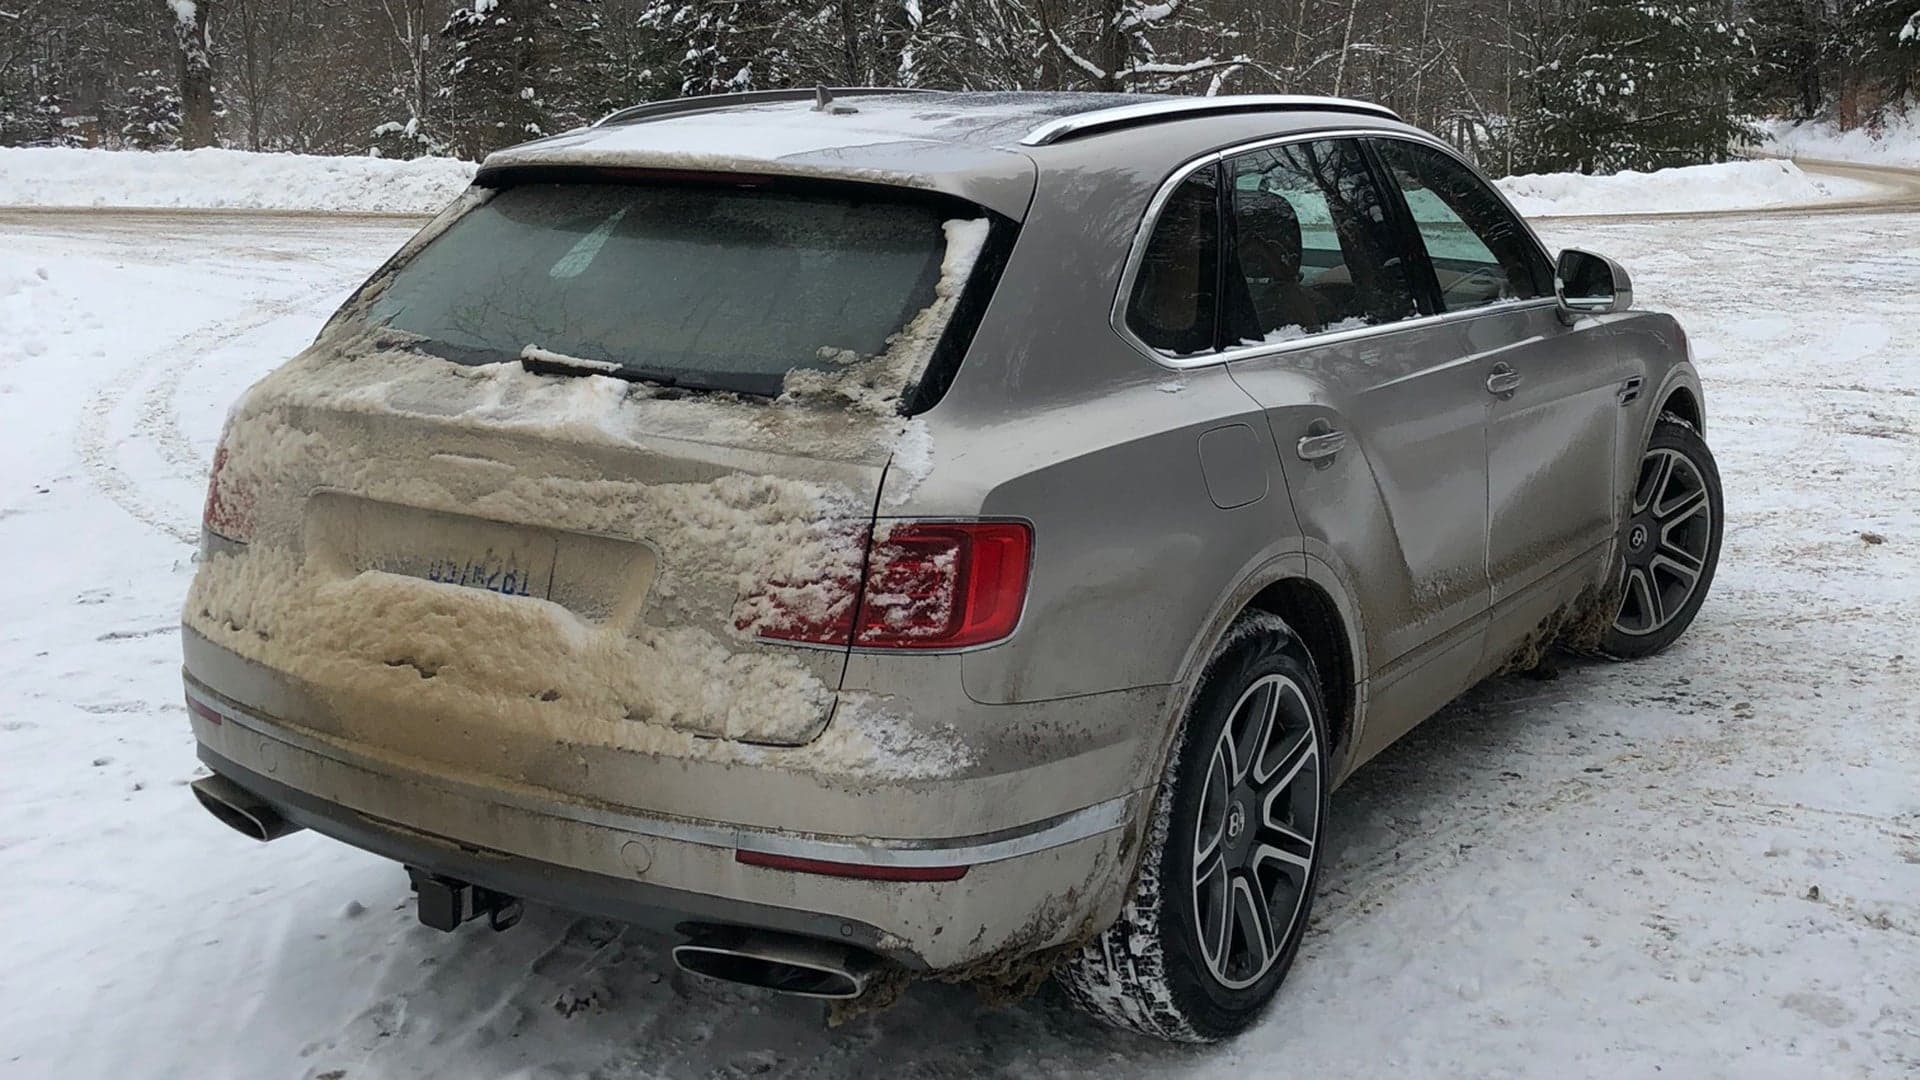 Backroad Blasting in the Bentley Bentayga: The Fanciest SUV Takes on Vermont